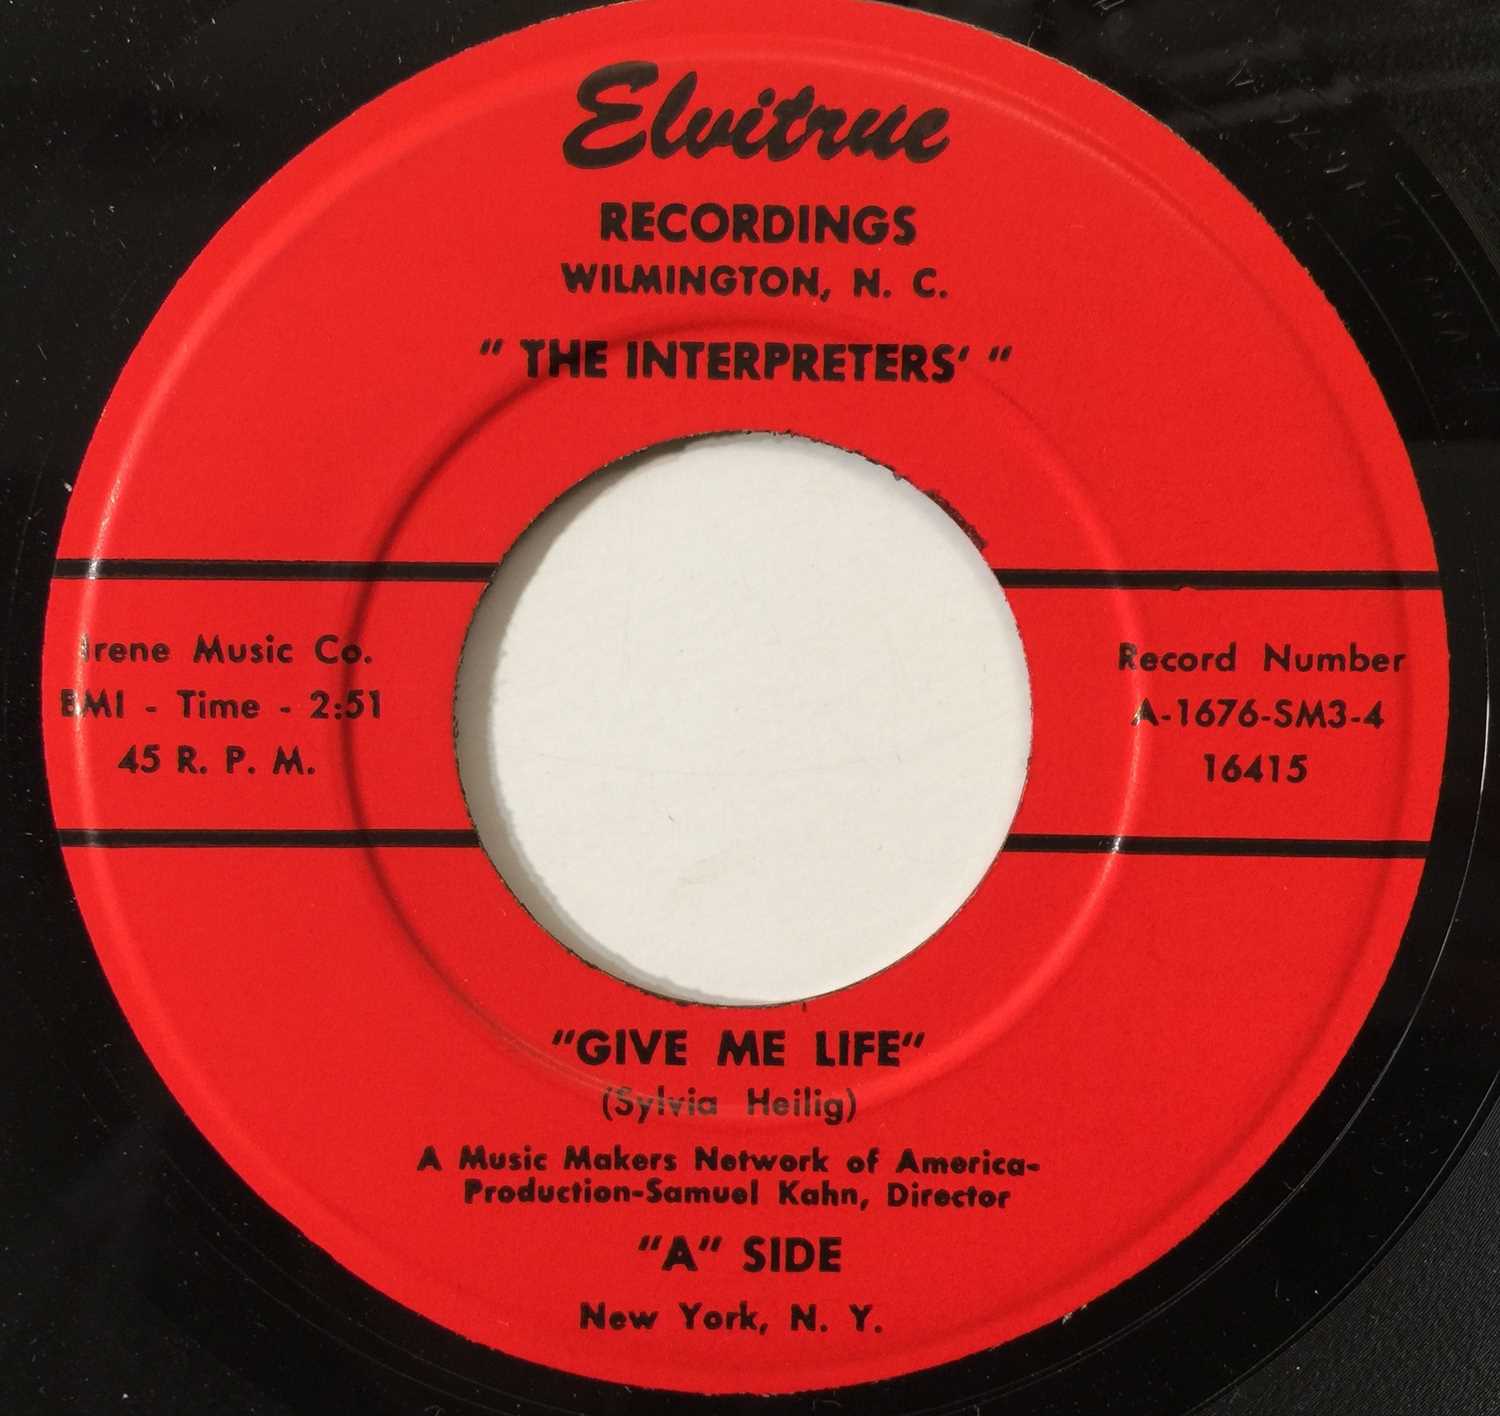 Lot 72 - THE INTERPRETERS - GIVE ME LIFE/ HAVE YOUR FLING 7" (60s POP-SOUL - 16415)